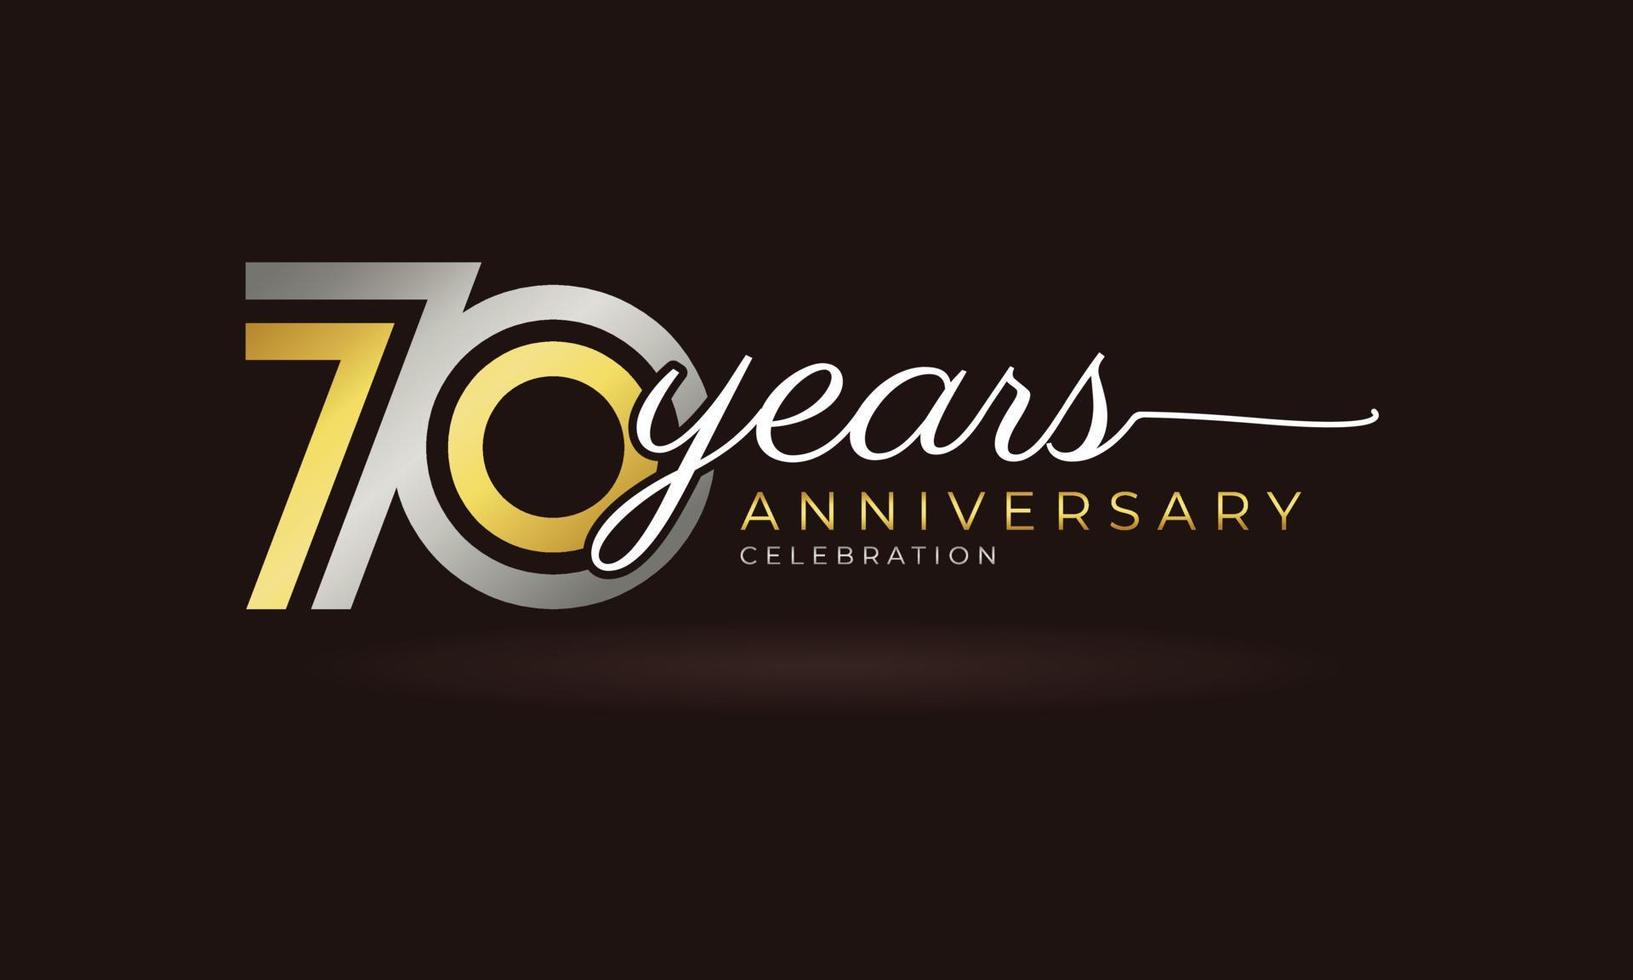 70 Year Anniversary Celebration Logotype with Linked Multiple Line Silver and Golden Color for Celebration Event, Wedding, Greeting Card, and Invitation Isolated on Dark Background vector